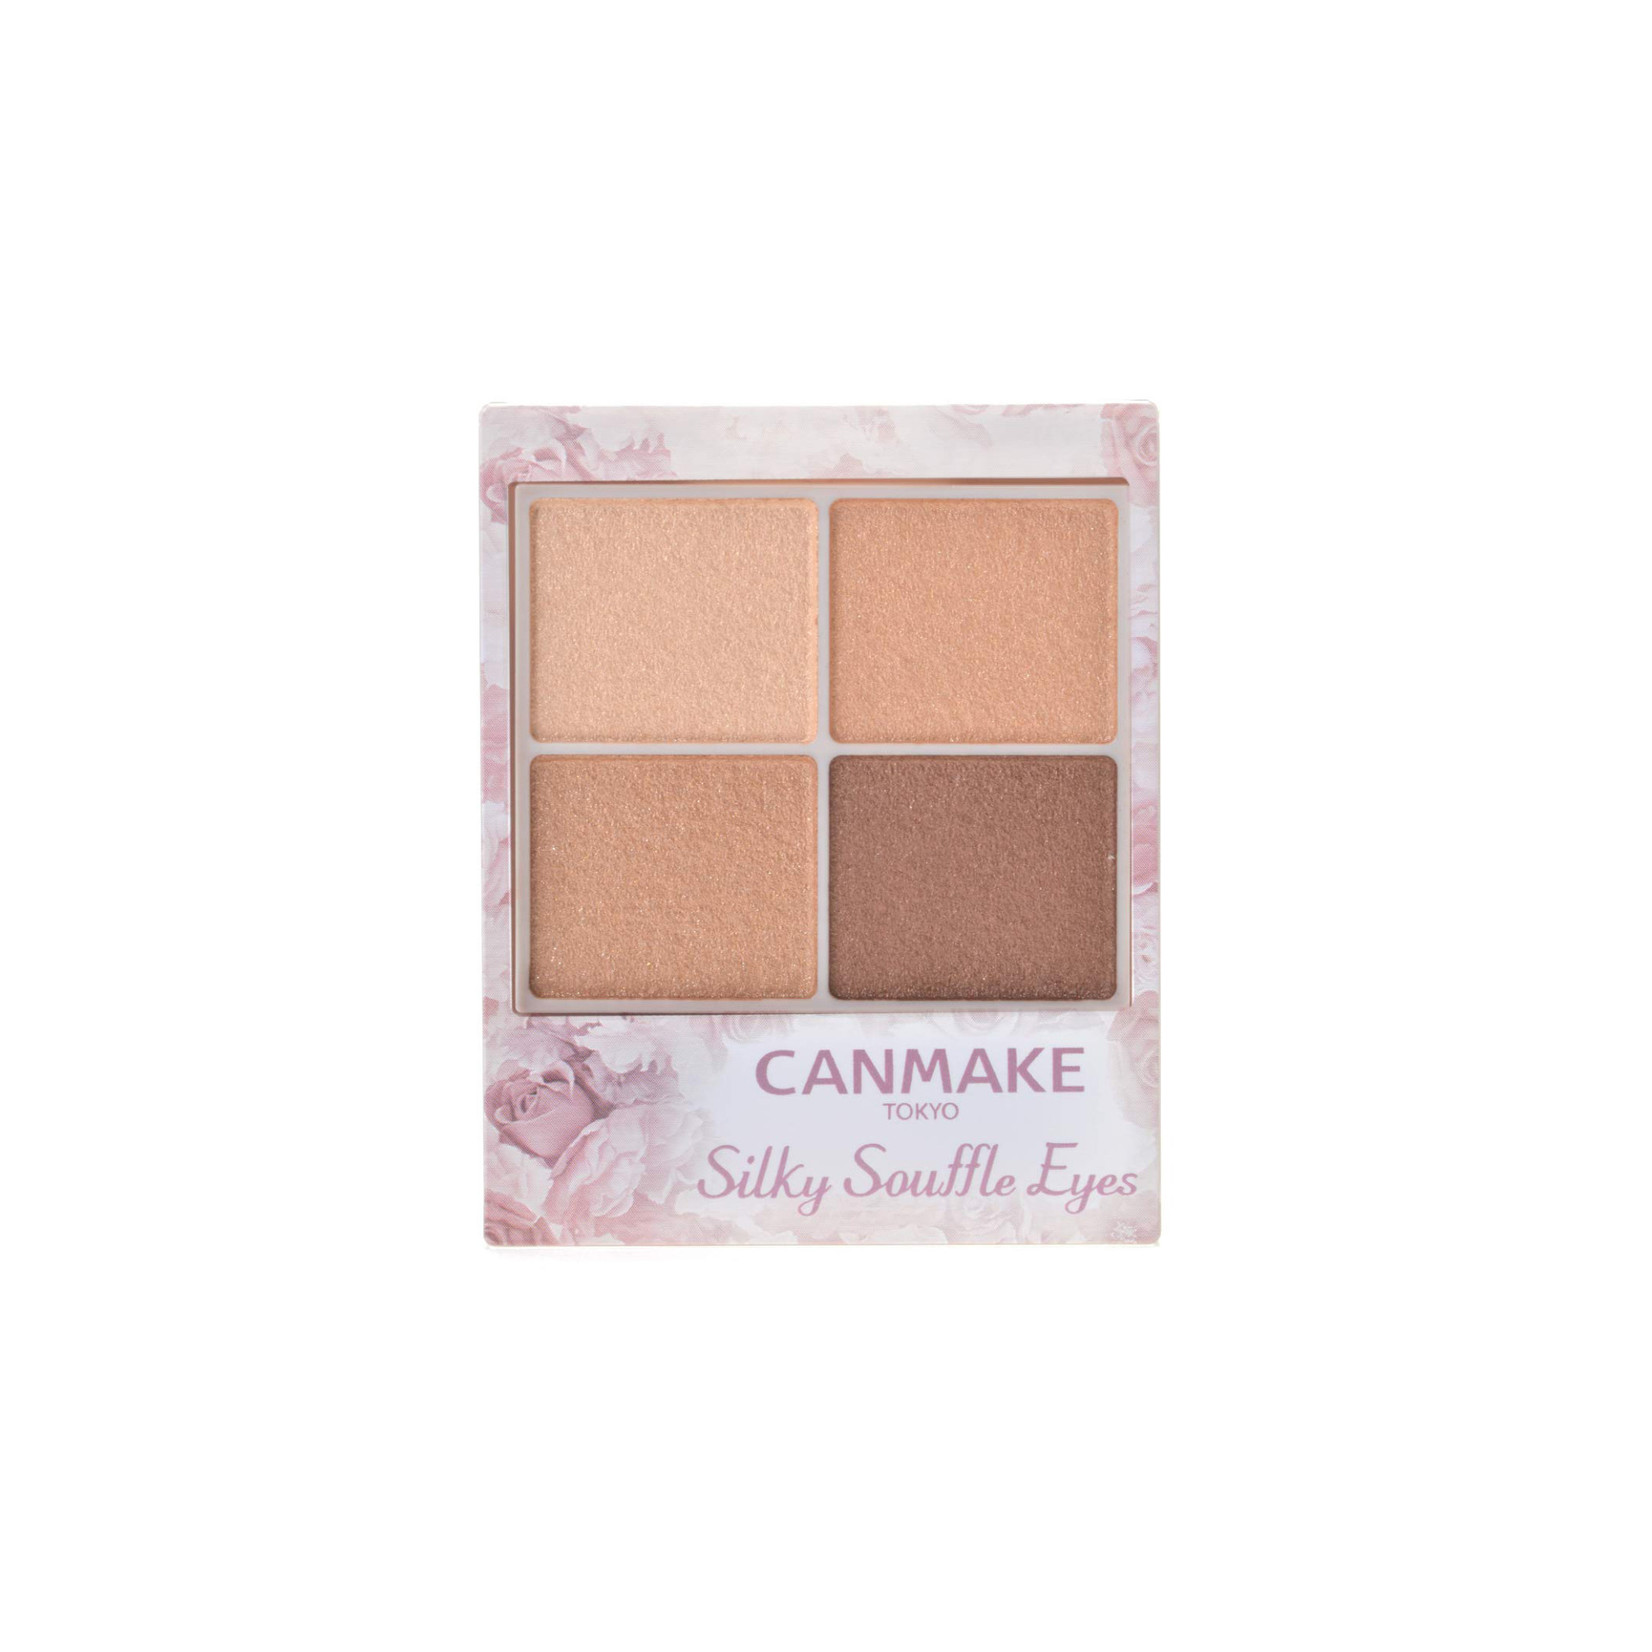 Canmake Canmake Silky Souffle Eyes 01 Noble Beige